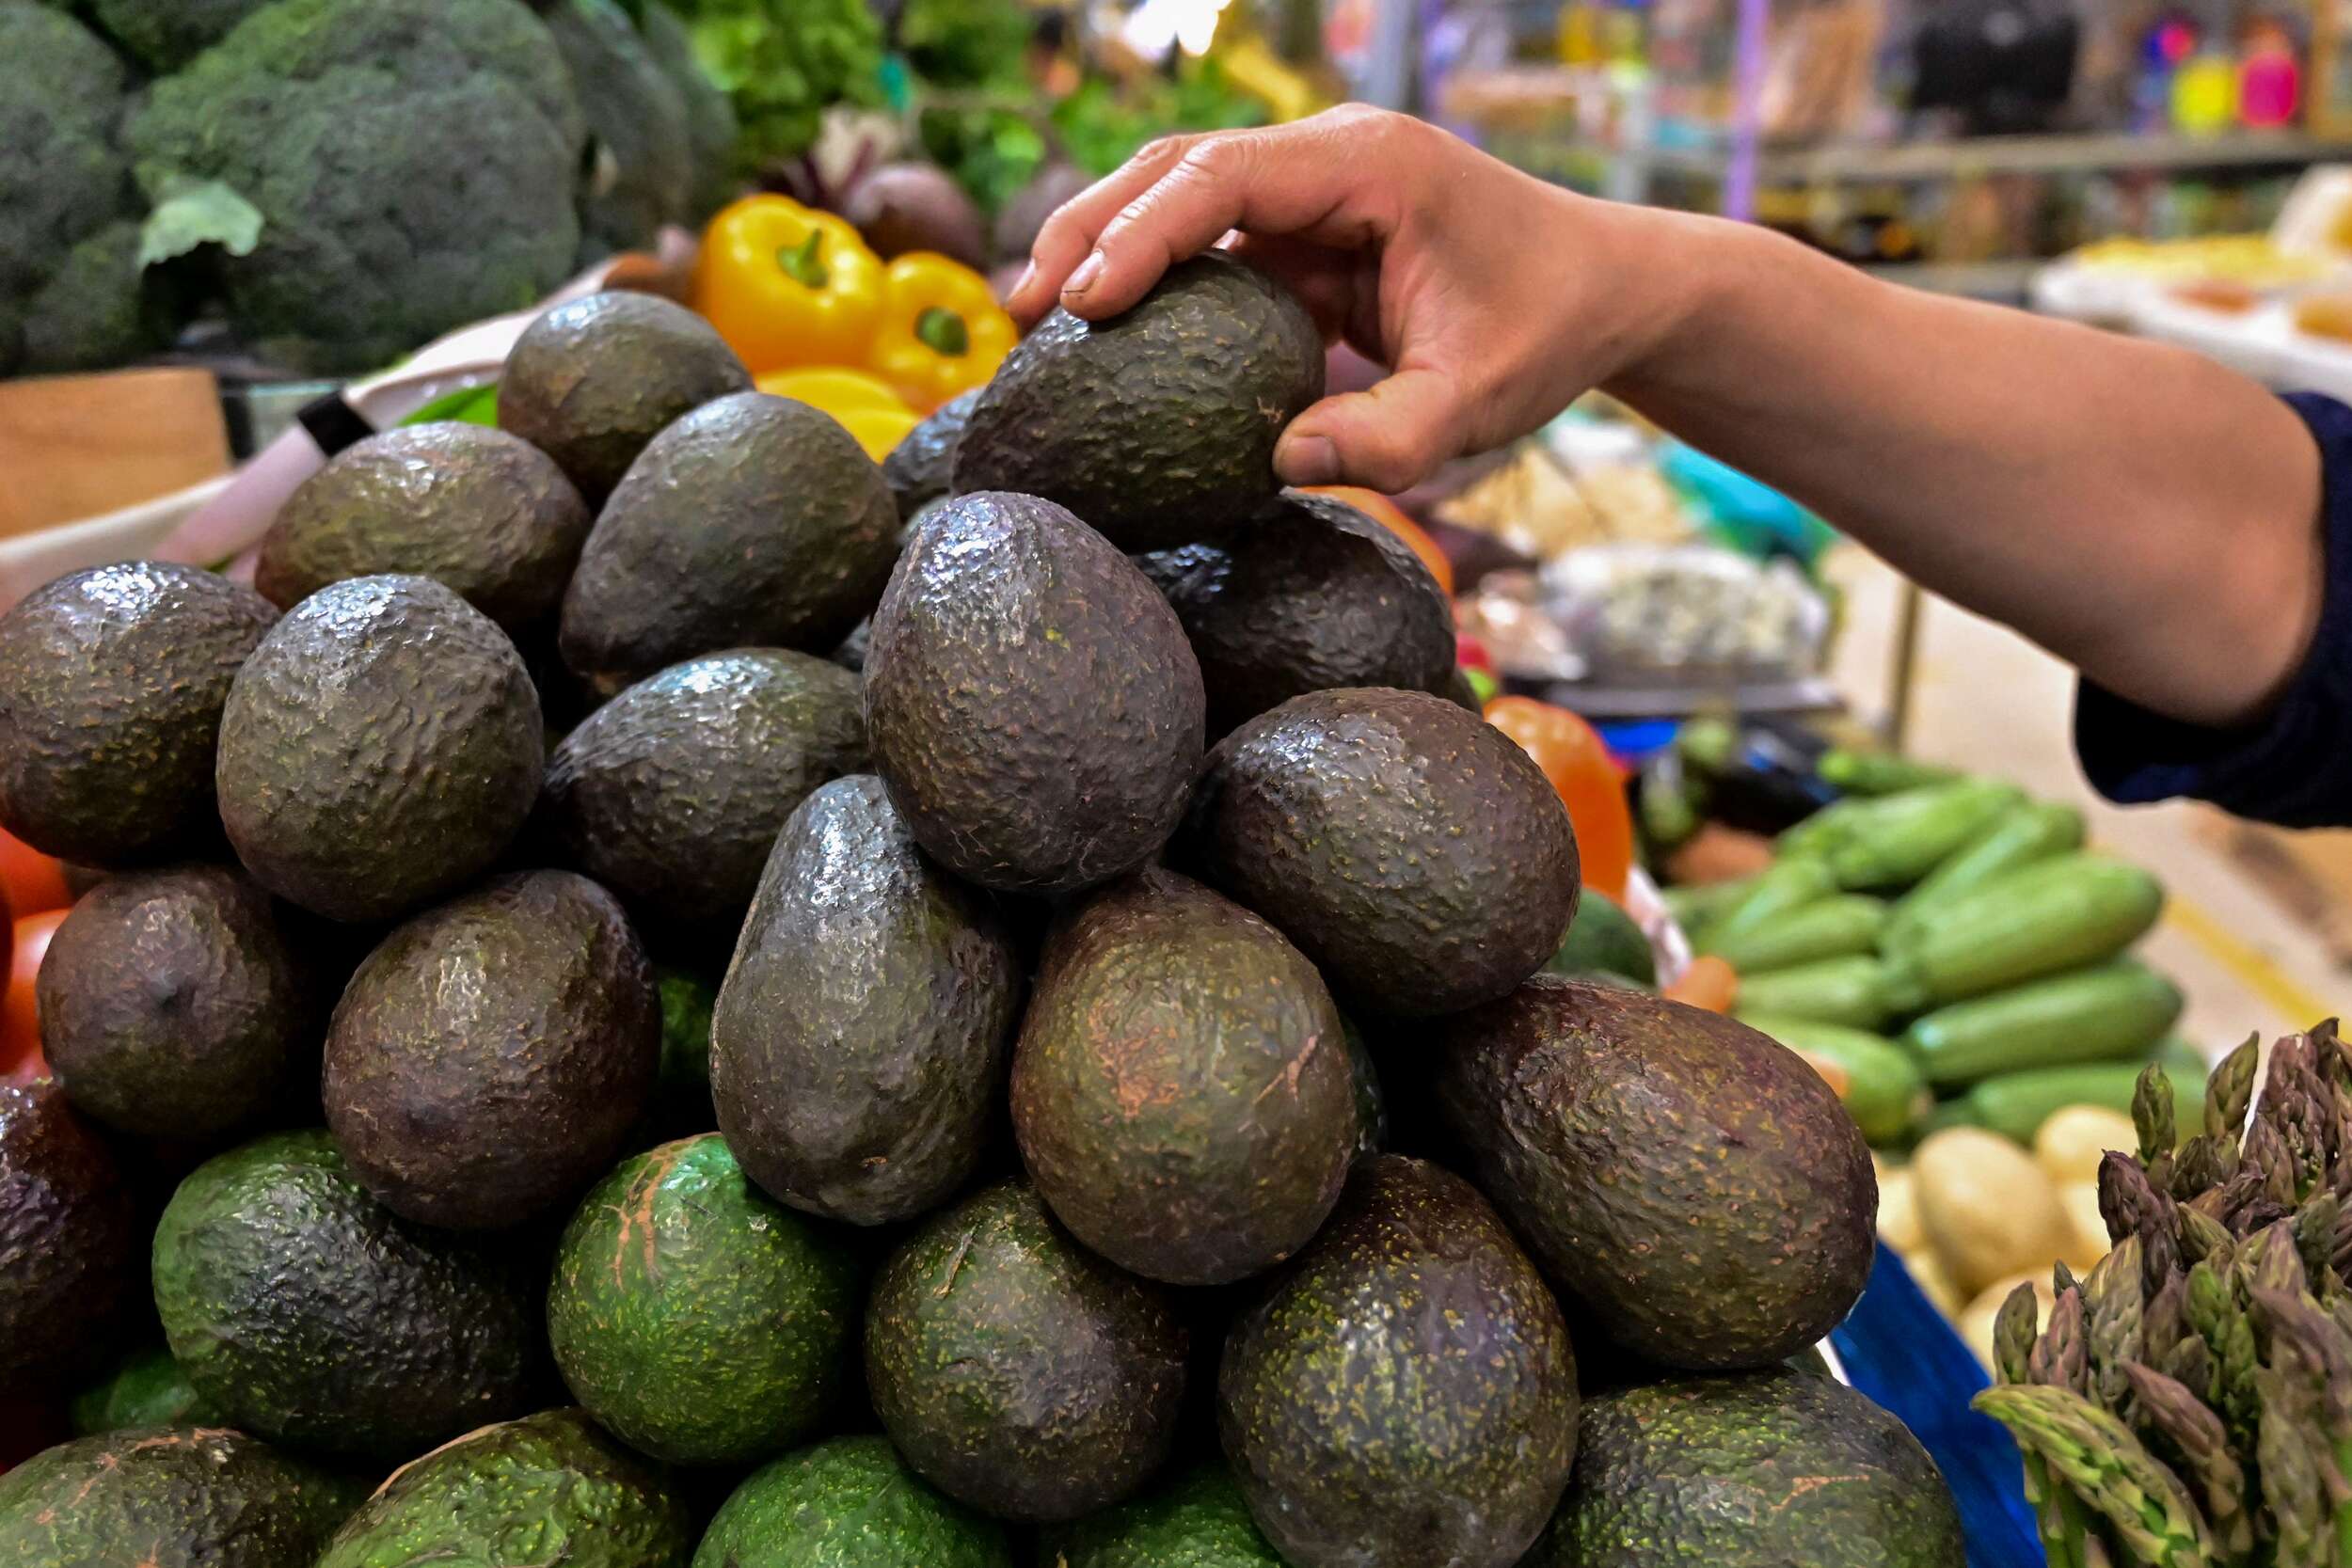 Are Avocados Good for You? 10 Science-Backed Effects of Eating Them